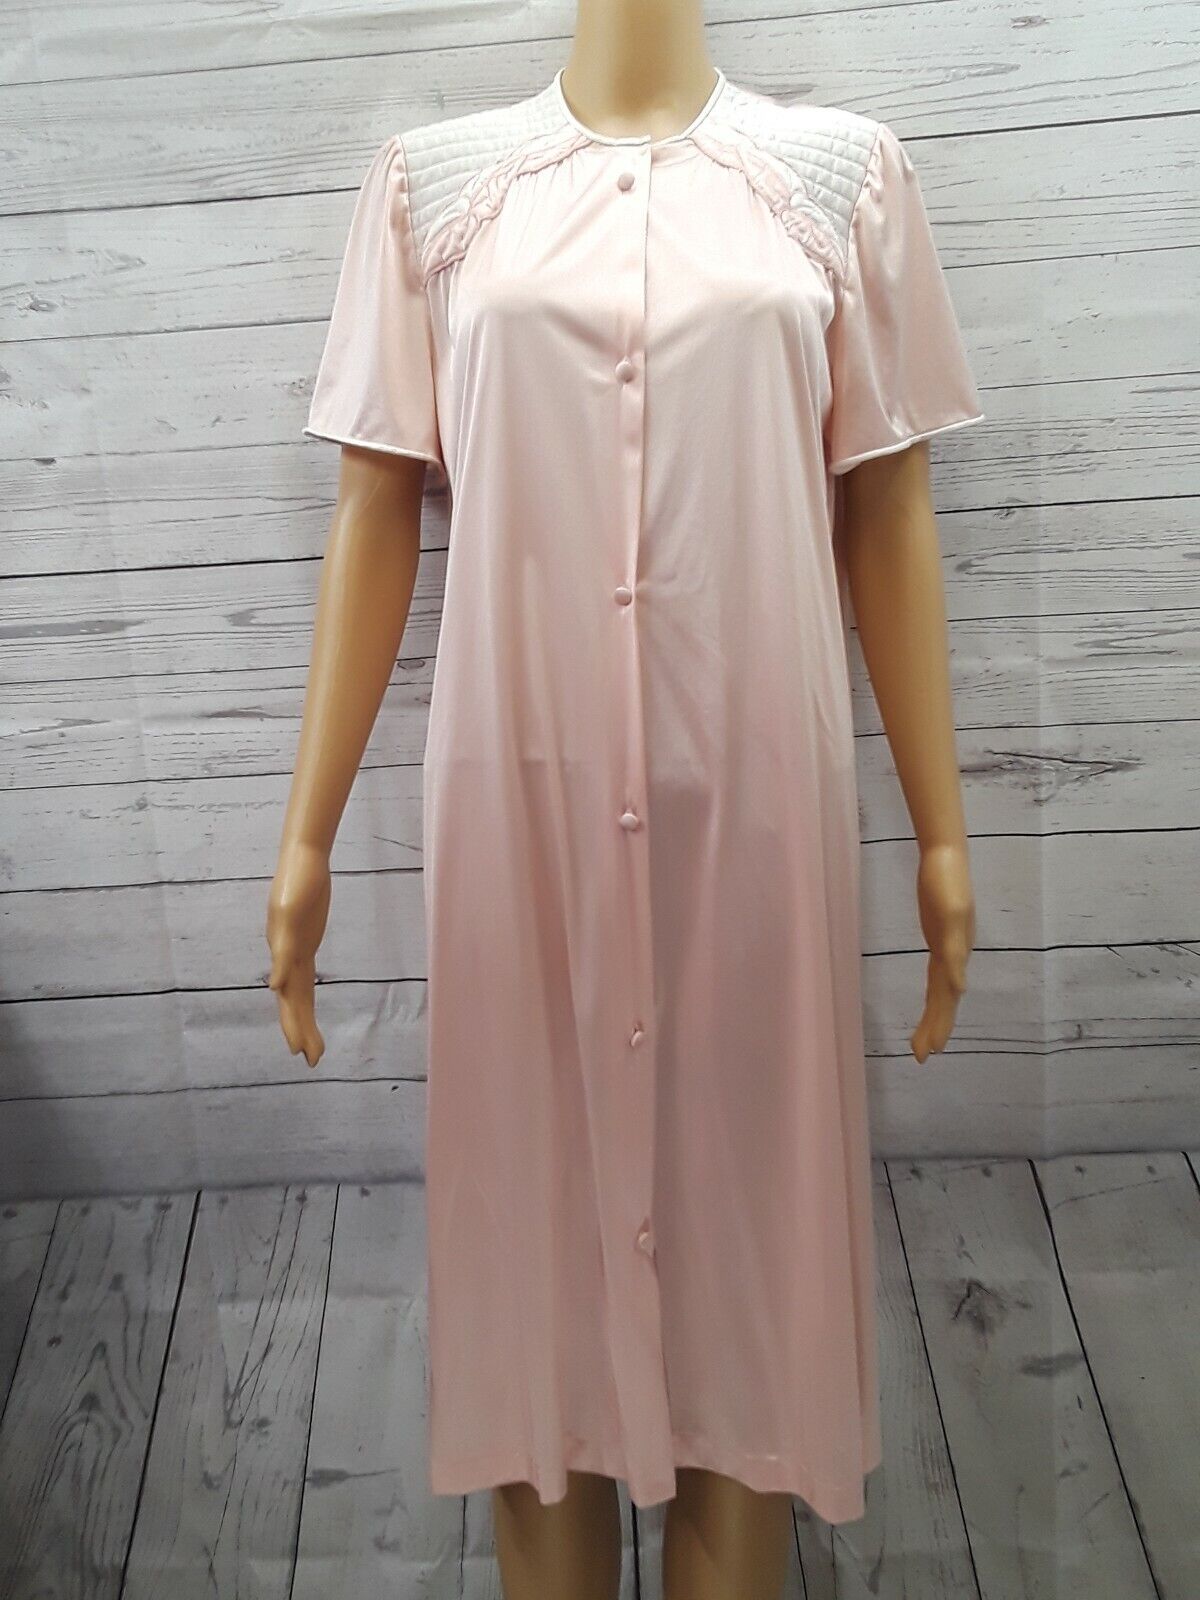 Vtg Vanity Fair Light Pink Front Button Short Sleeve Nightgown Made in USA Sz M